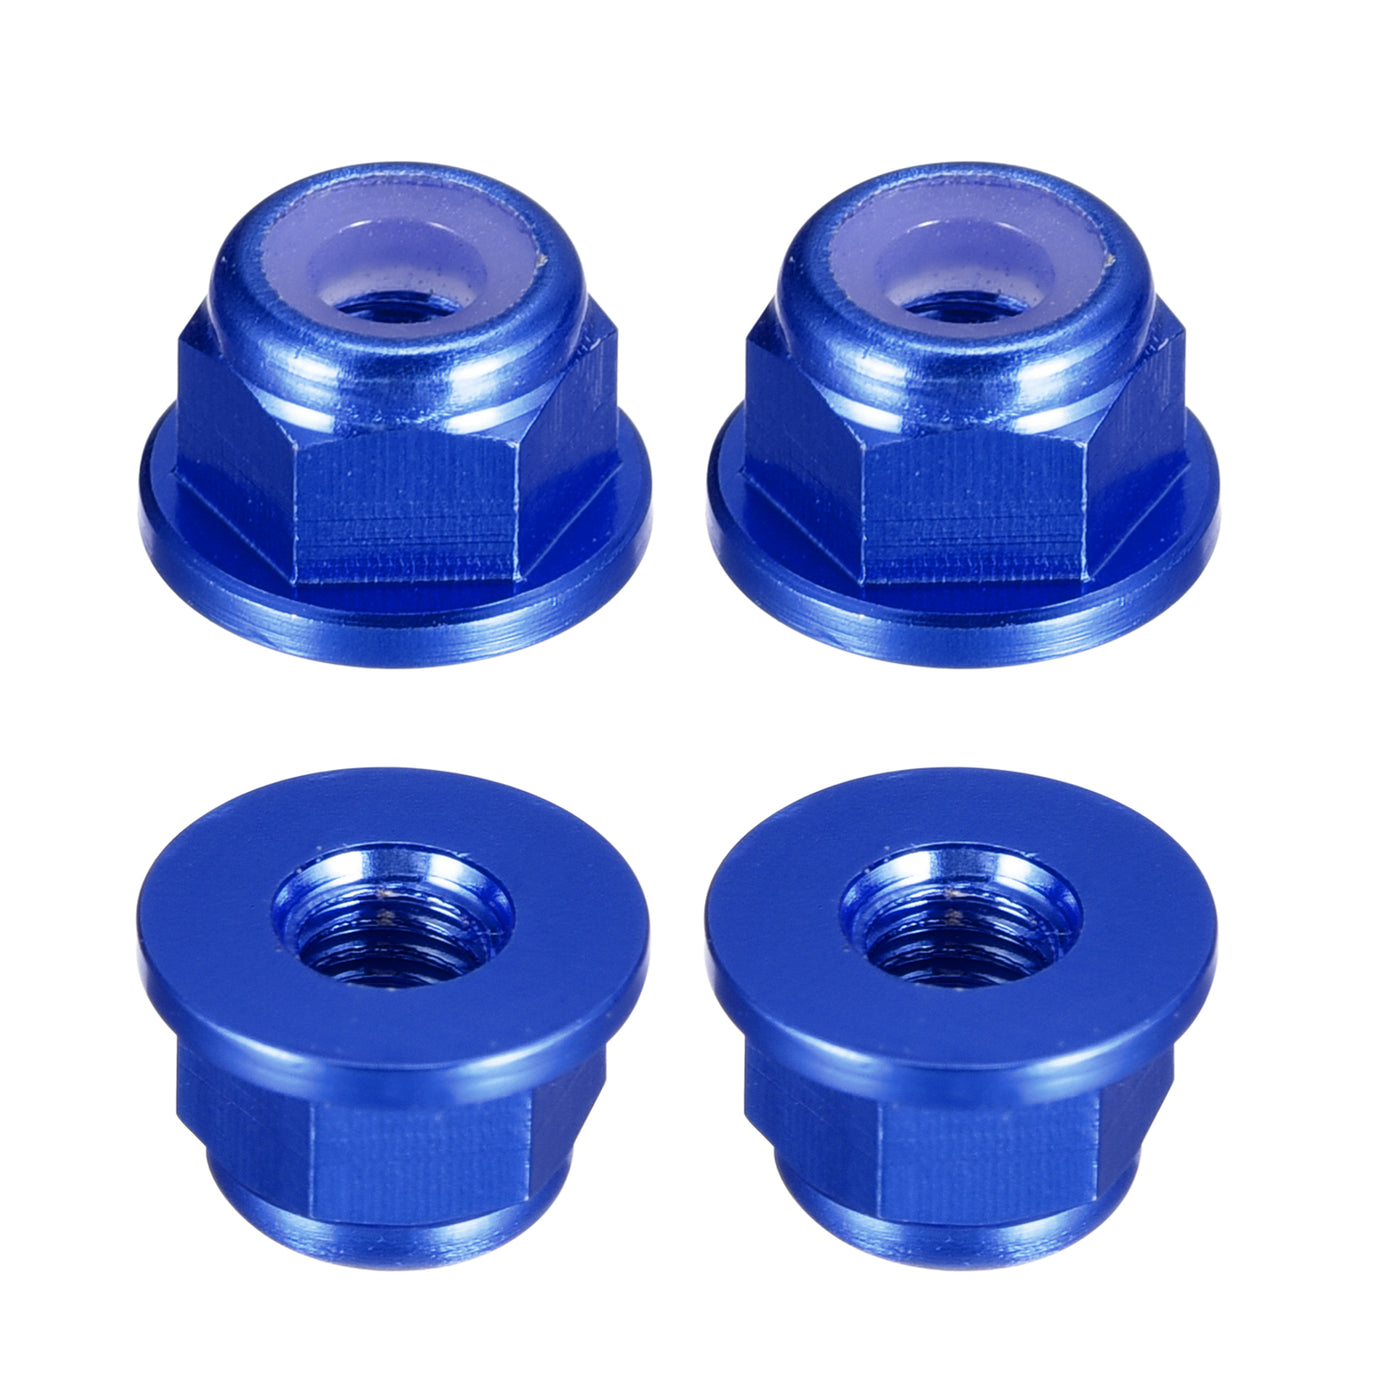 uxcell Uxcell Nylon Insert Hex Lock Nuts, 4pcs - M3 x 0.5mm Aluminum Alloy Self-Locking Nut, Anodizing Flange Lock Nut for Fasteners (Sapphire Blue)